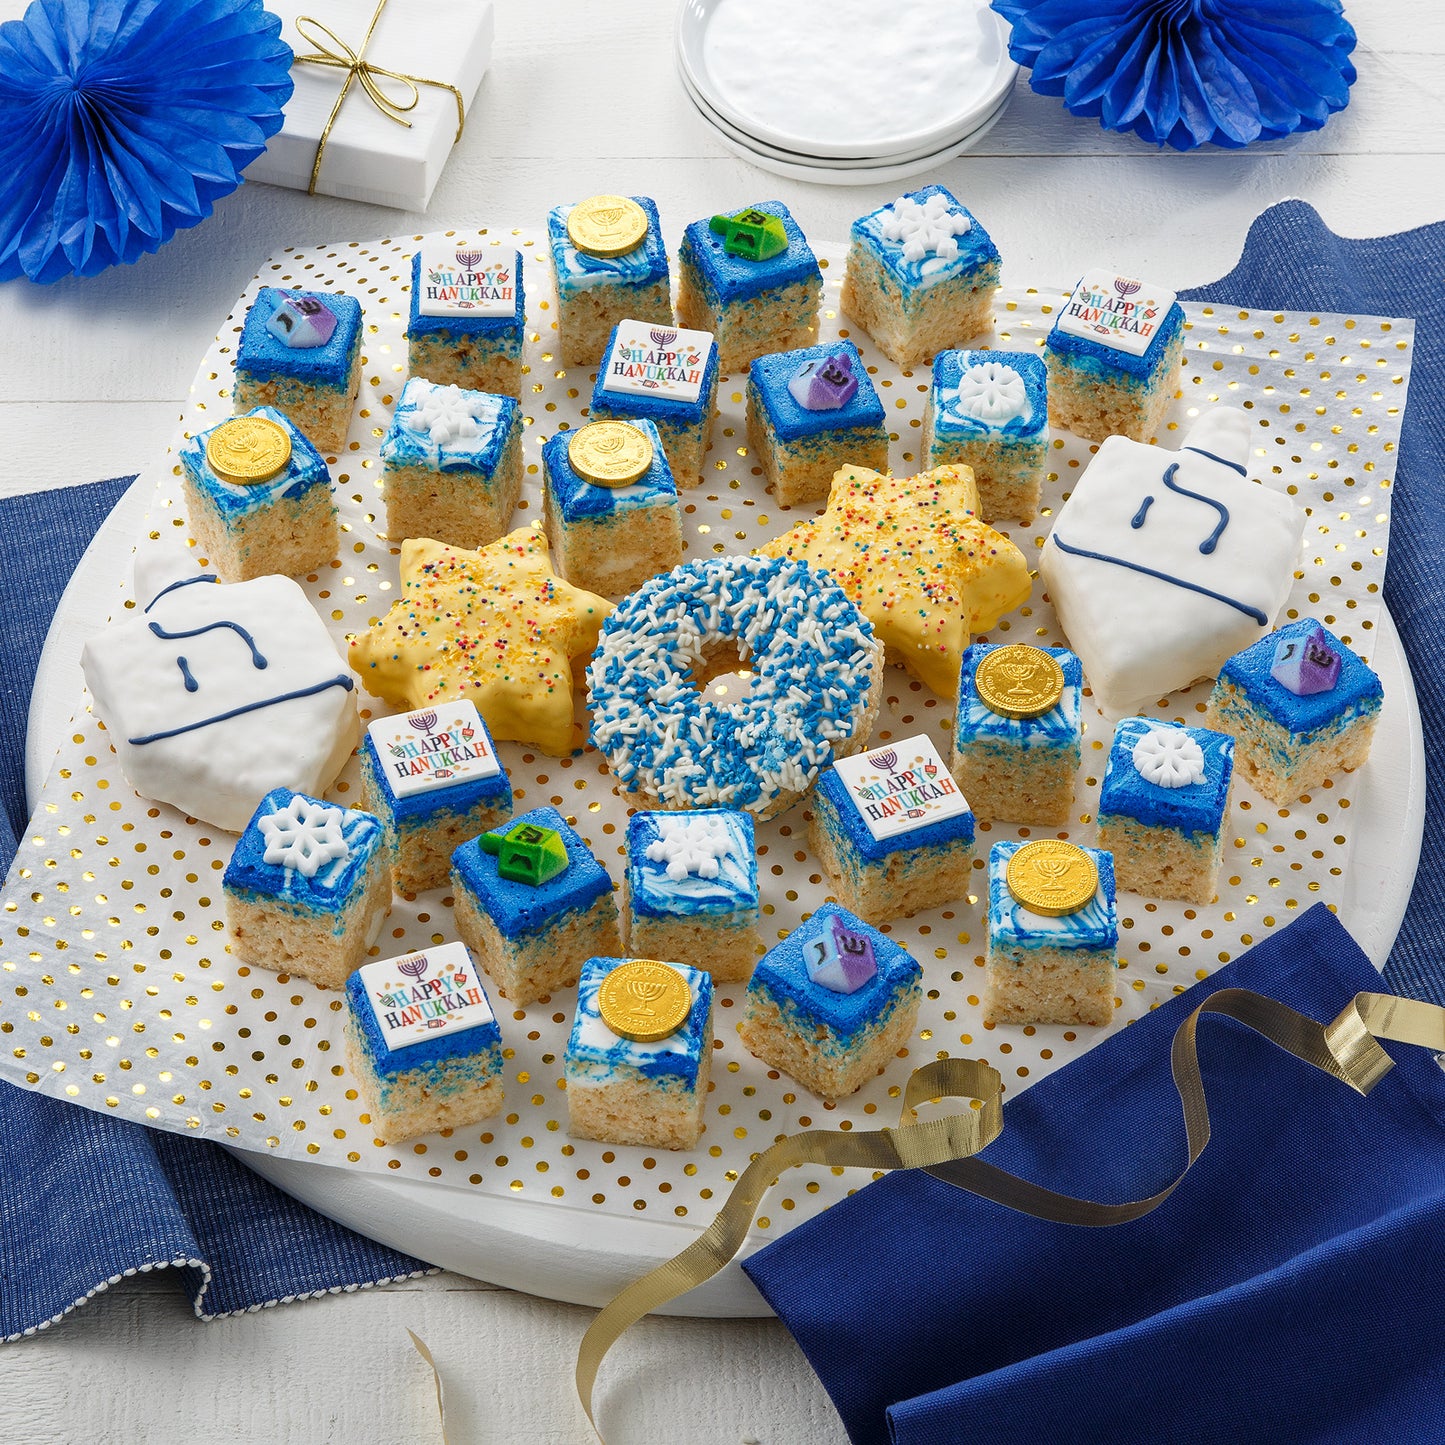 An assortment of different shaped Hanukkah-decorated rice krispies